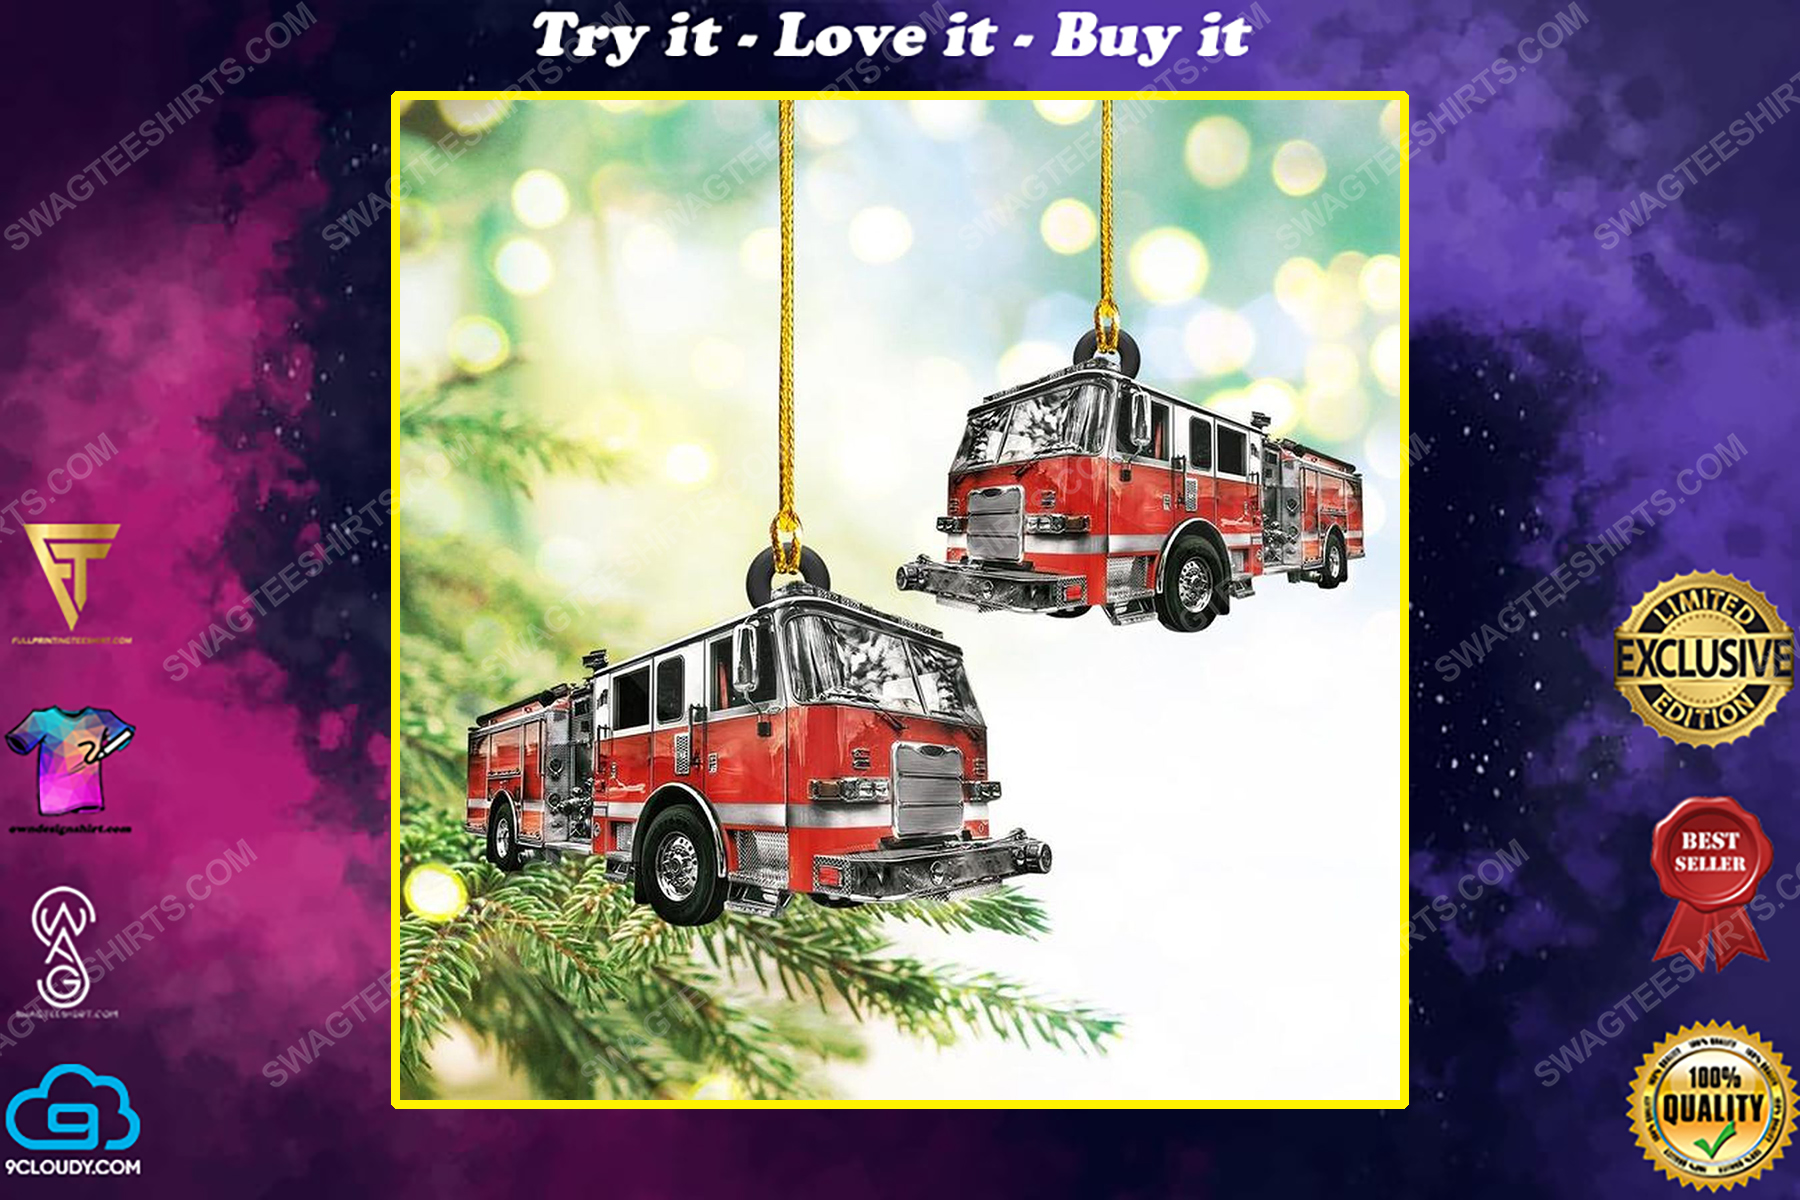 Fire engine firefighters christmas gift ornament